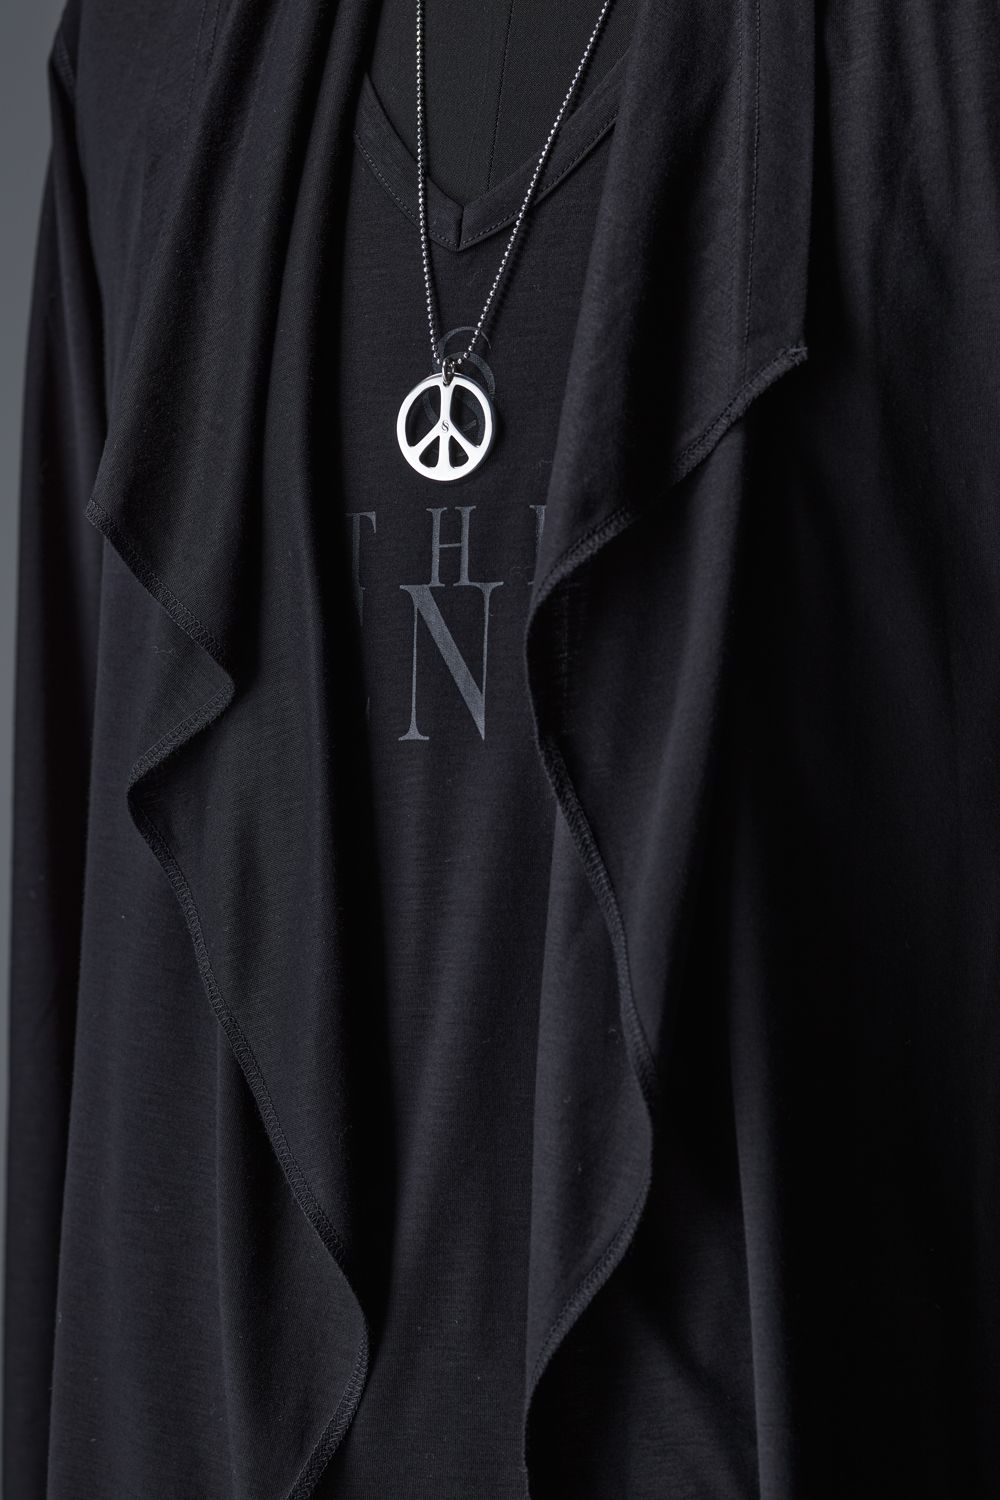 THE ONENESS - SGZ-PEACE Necklace / SUGIZO ピース ネックレス | laid ...